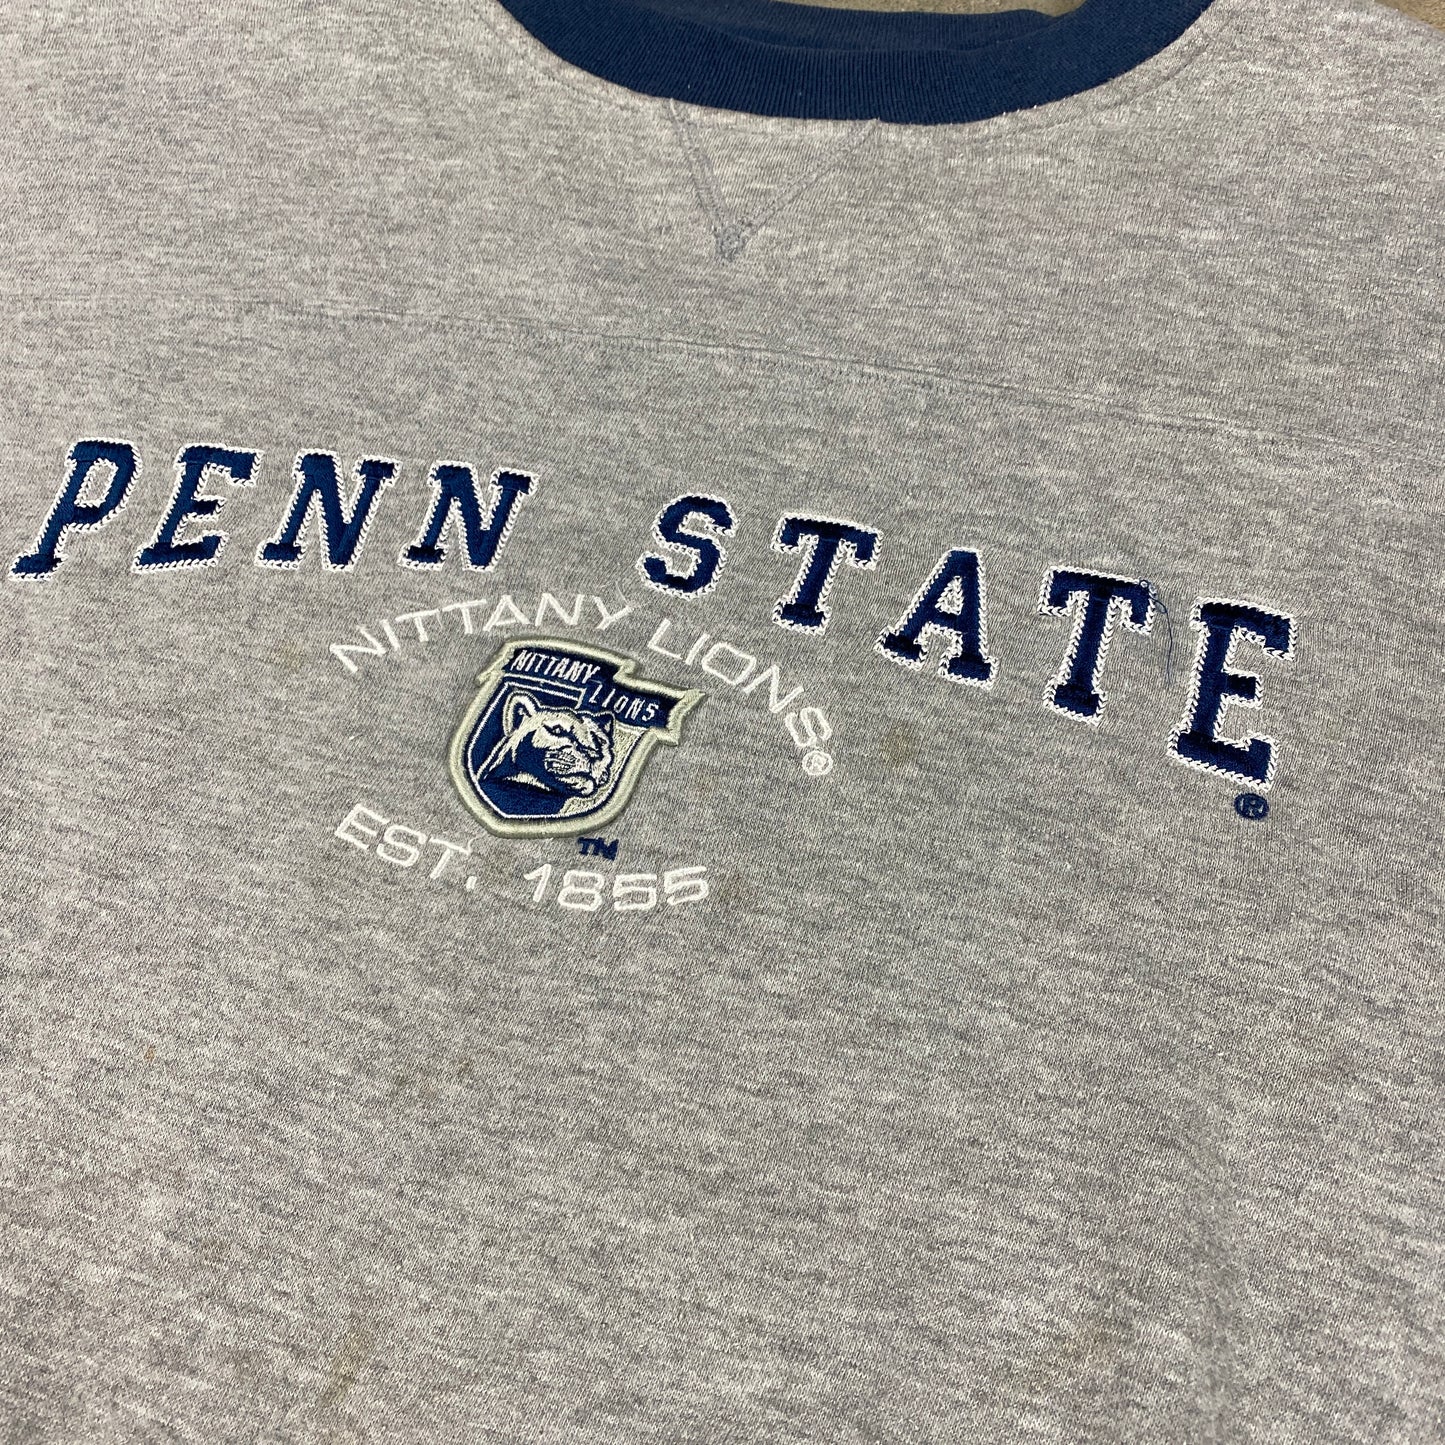 Lee Penn State embroidered sweater (XL-XXL)